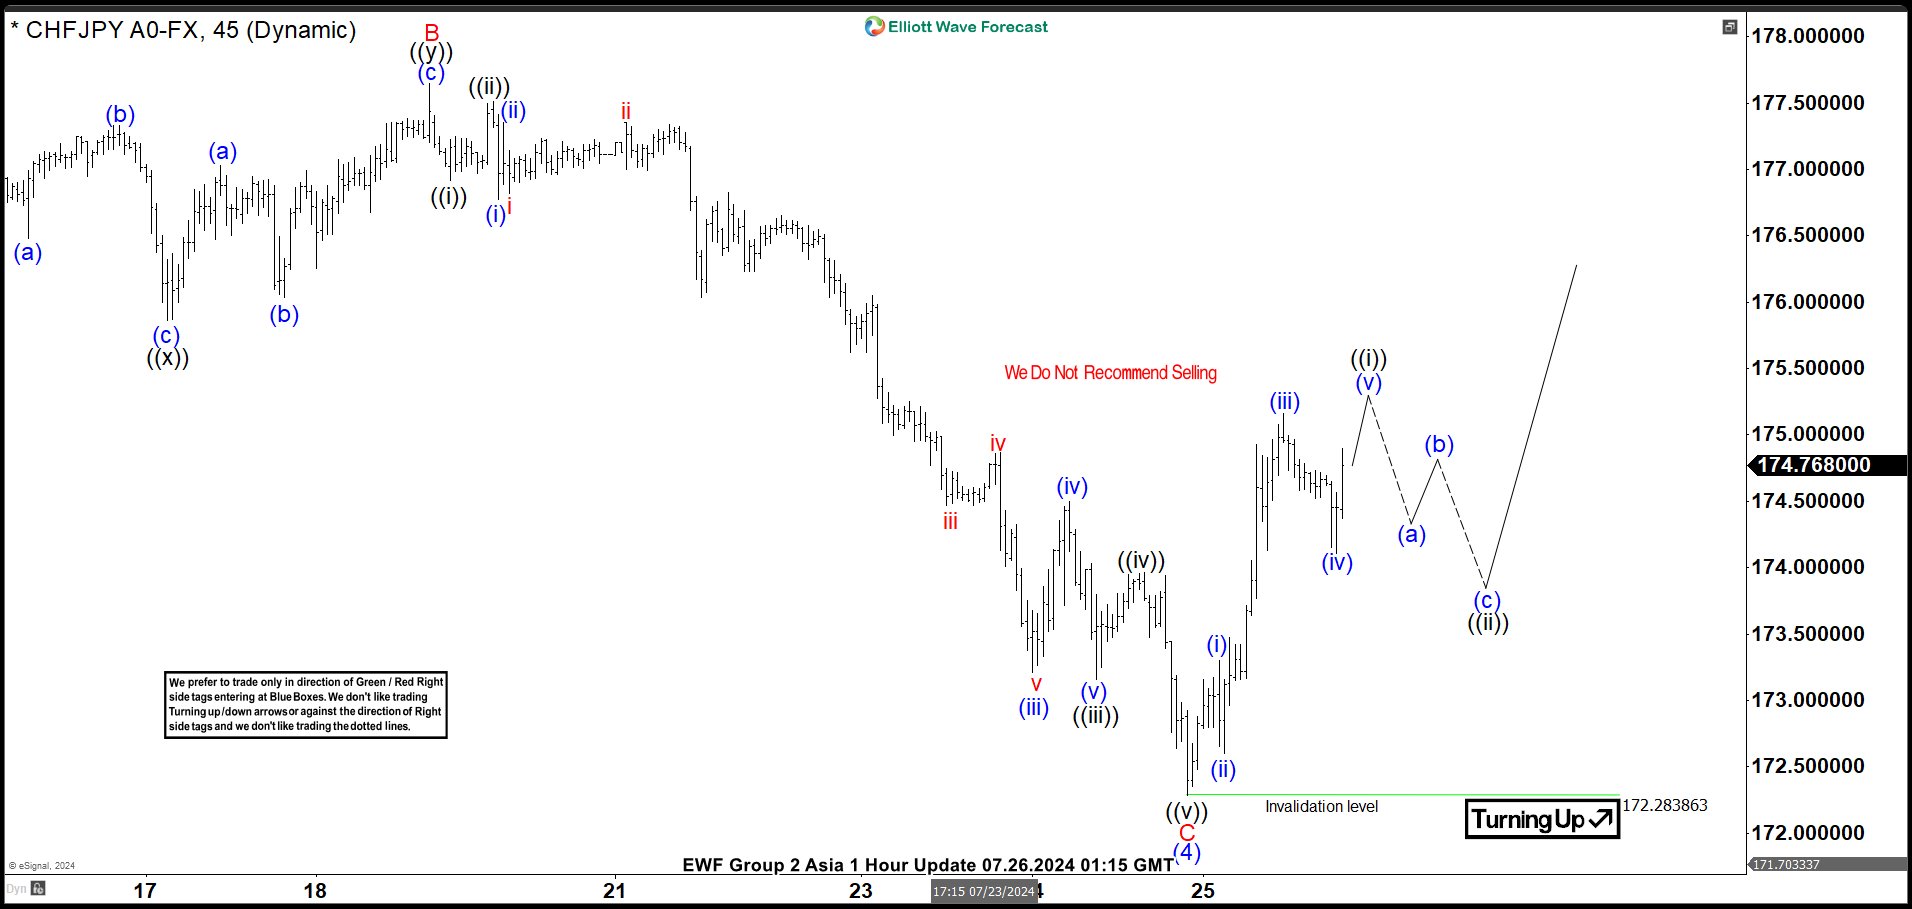 Elliott Wave Intraday Analysis: CHFJPY Bouncing Higher from Support Zone